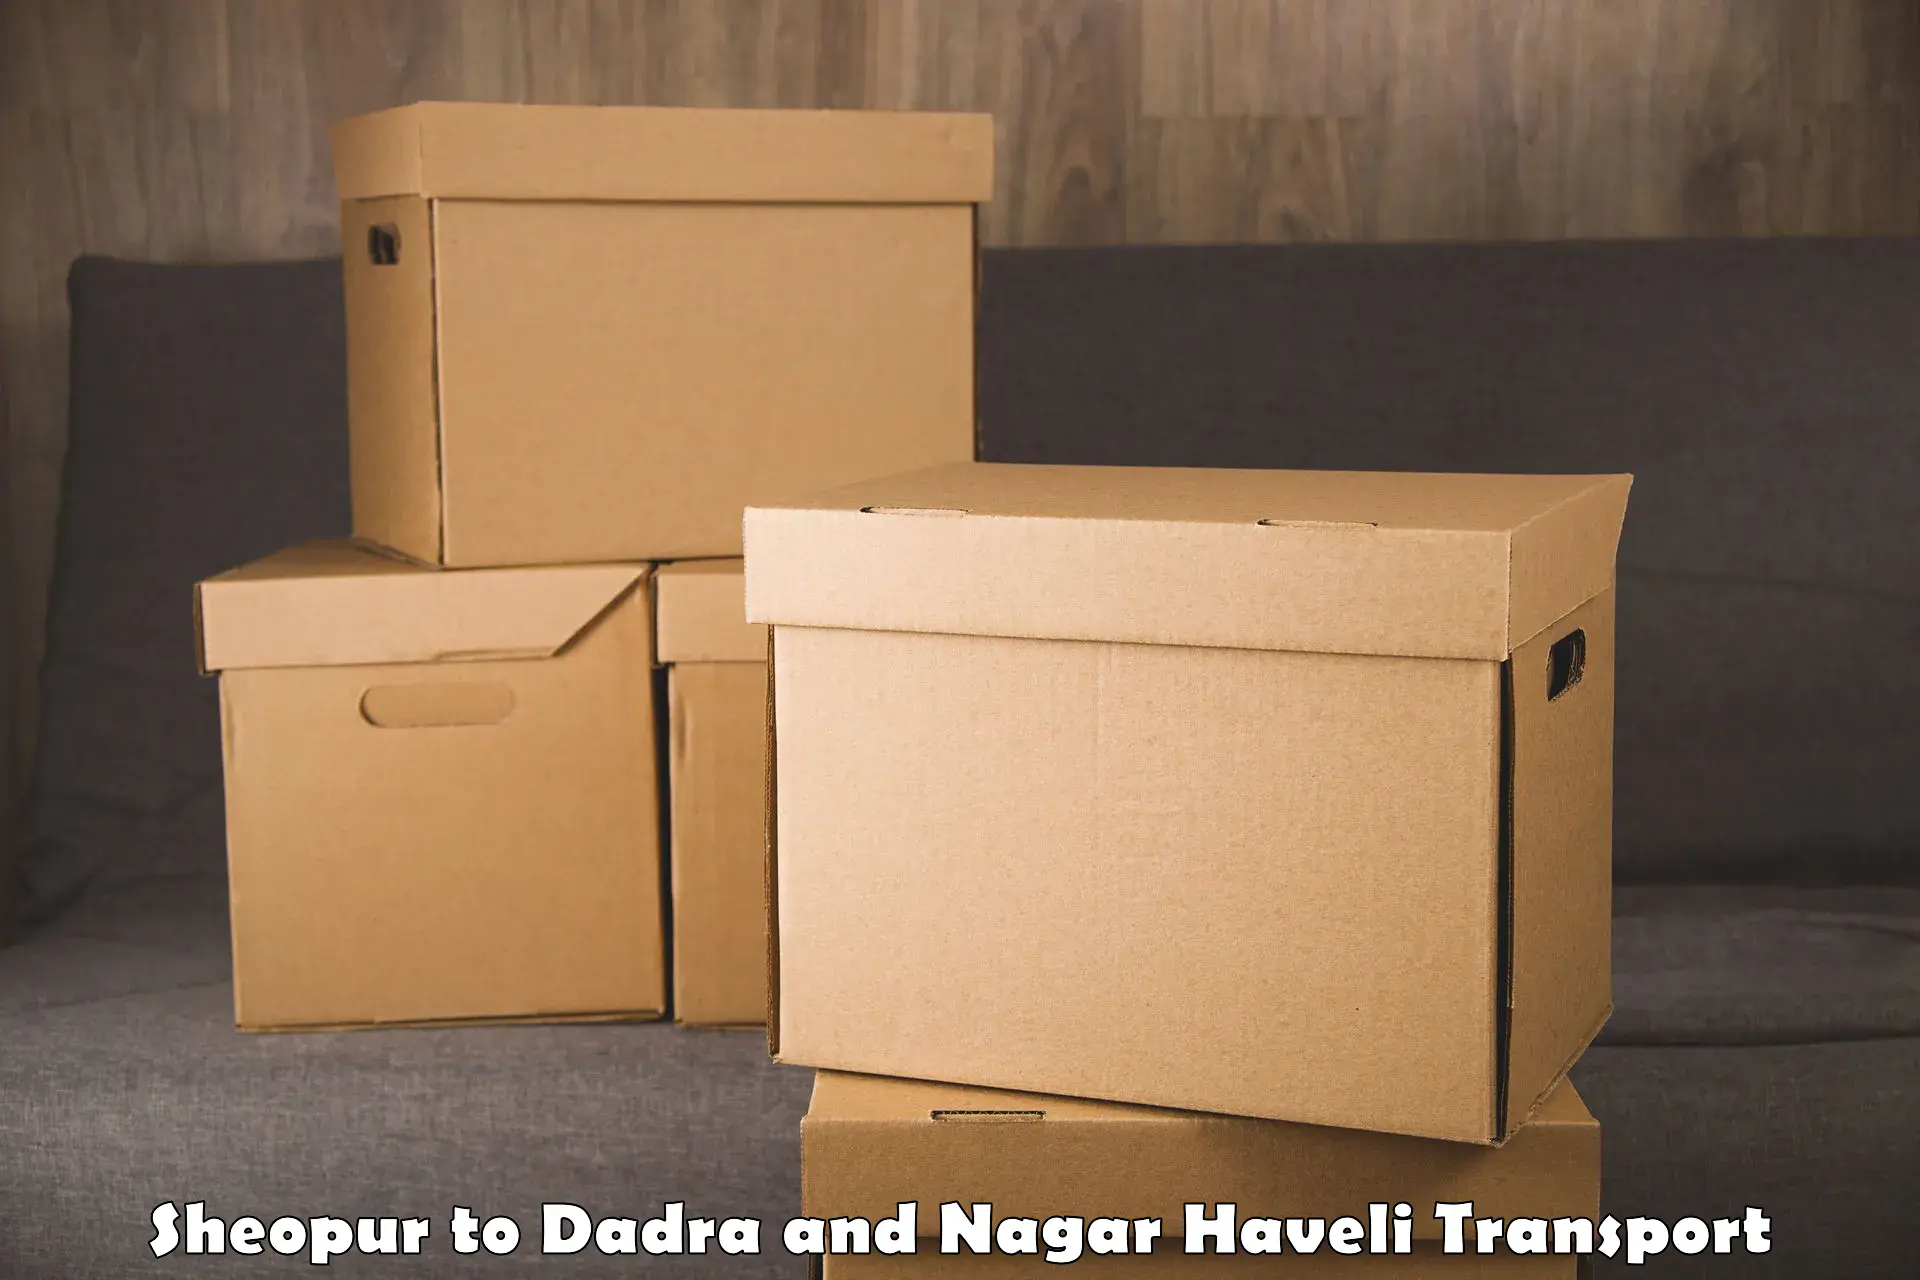 Commercial transport service Sheopur to Dadra and Nagar Haveli